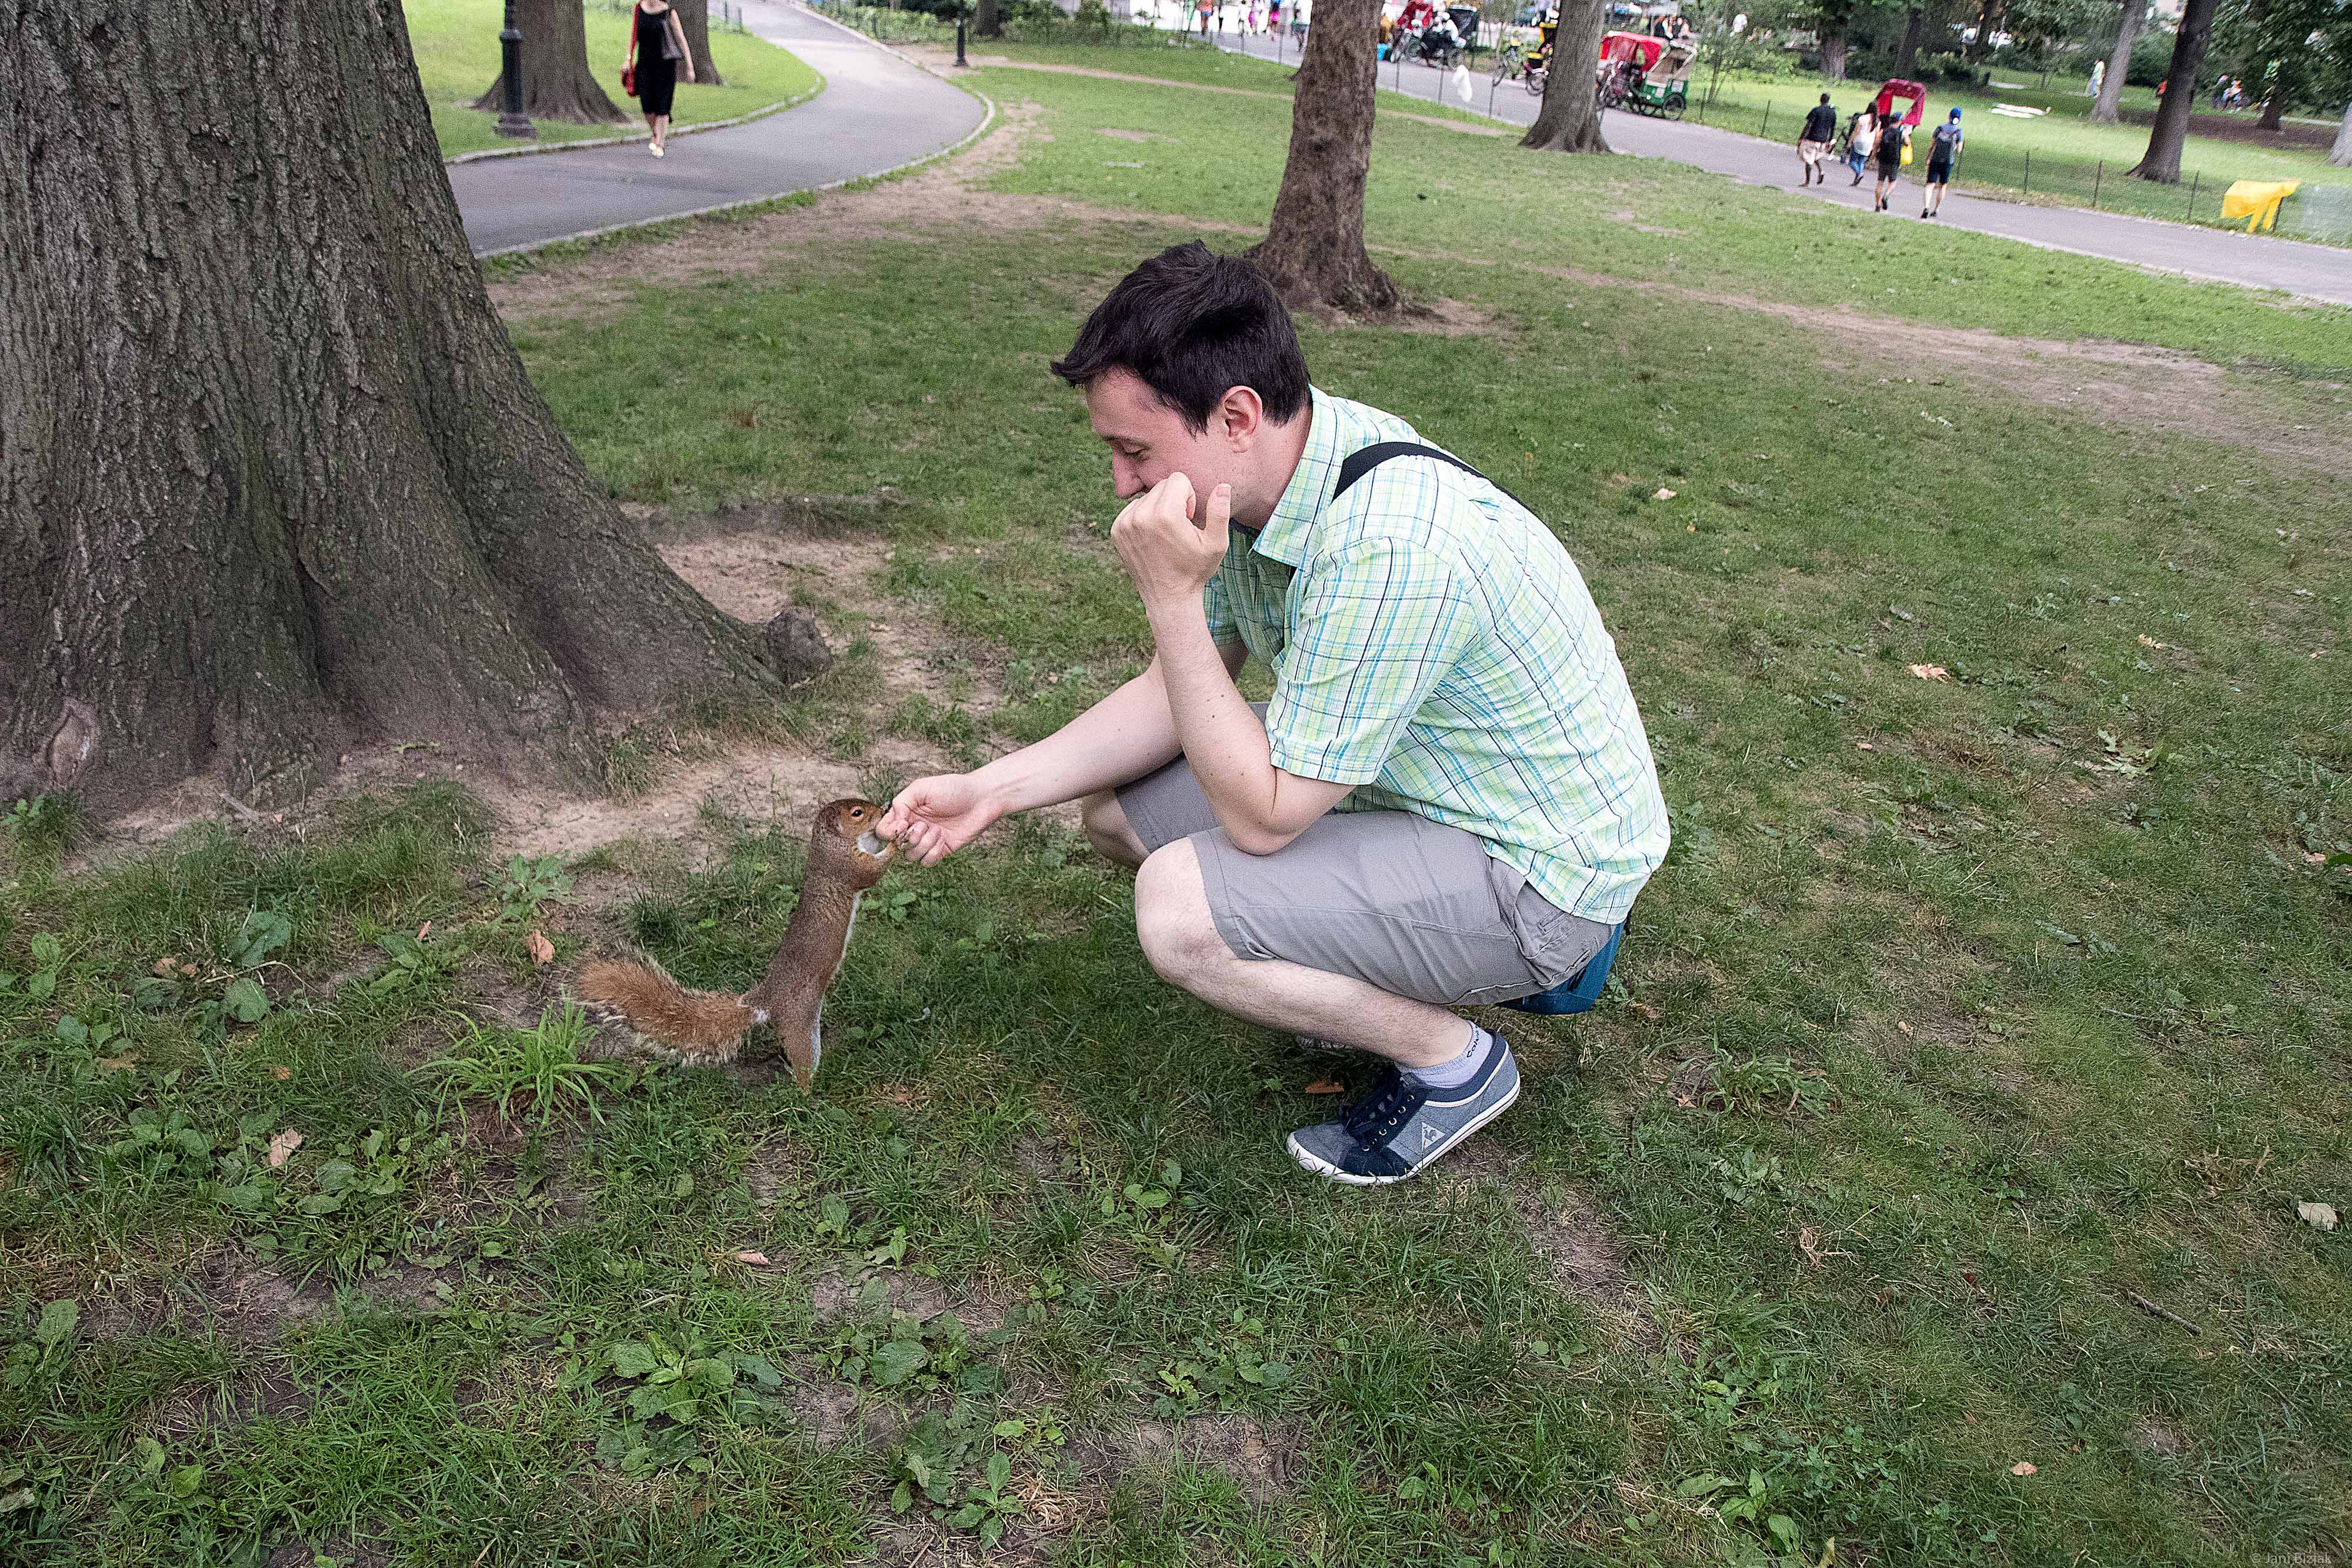 Trying to feed a Squirrel